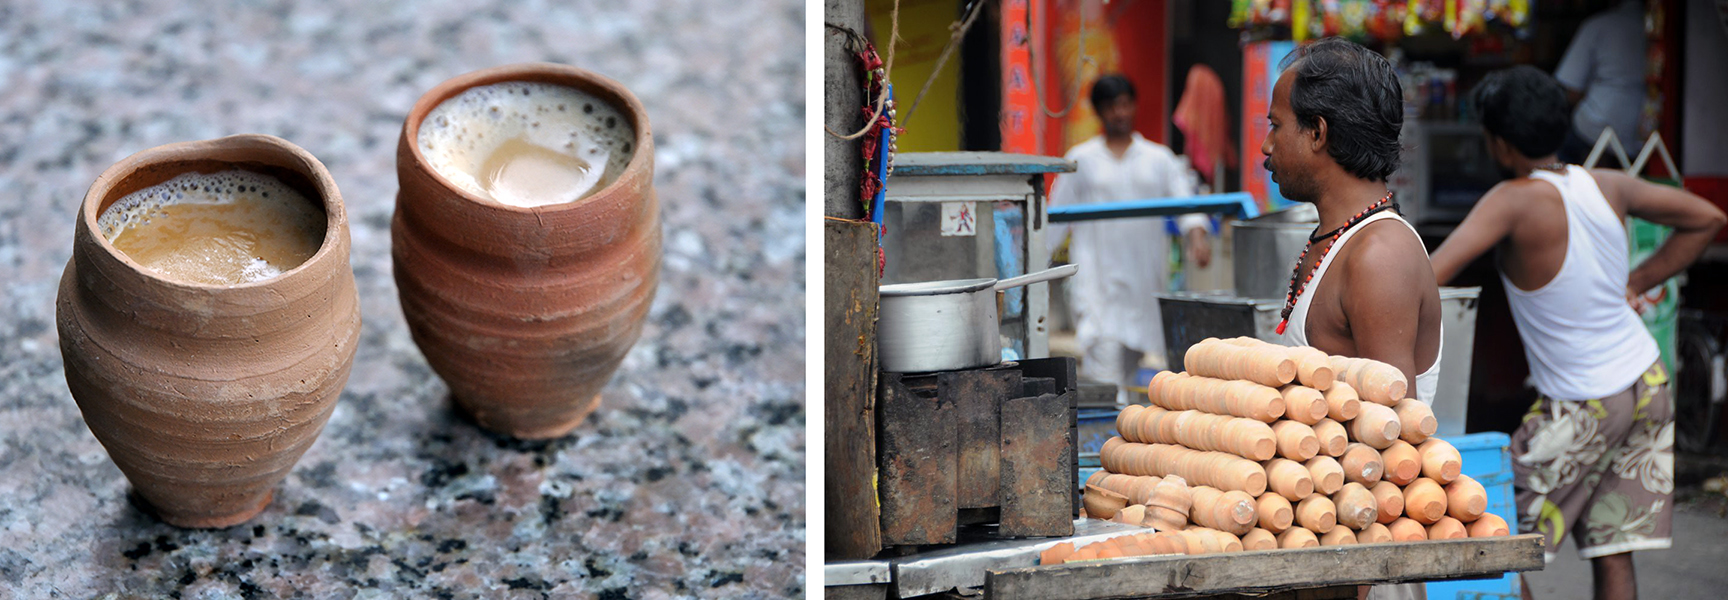 Left: Masala chai in terracotta cups (photo: Biswarup Ganguly, CC BY 3.0); Right: Chai vendor, Kolkata (photo: Nomad Tales, CC BY-SA 2.0)